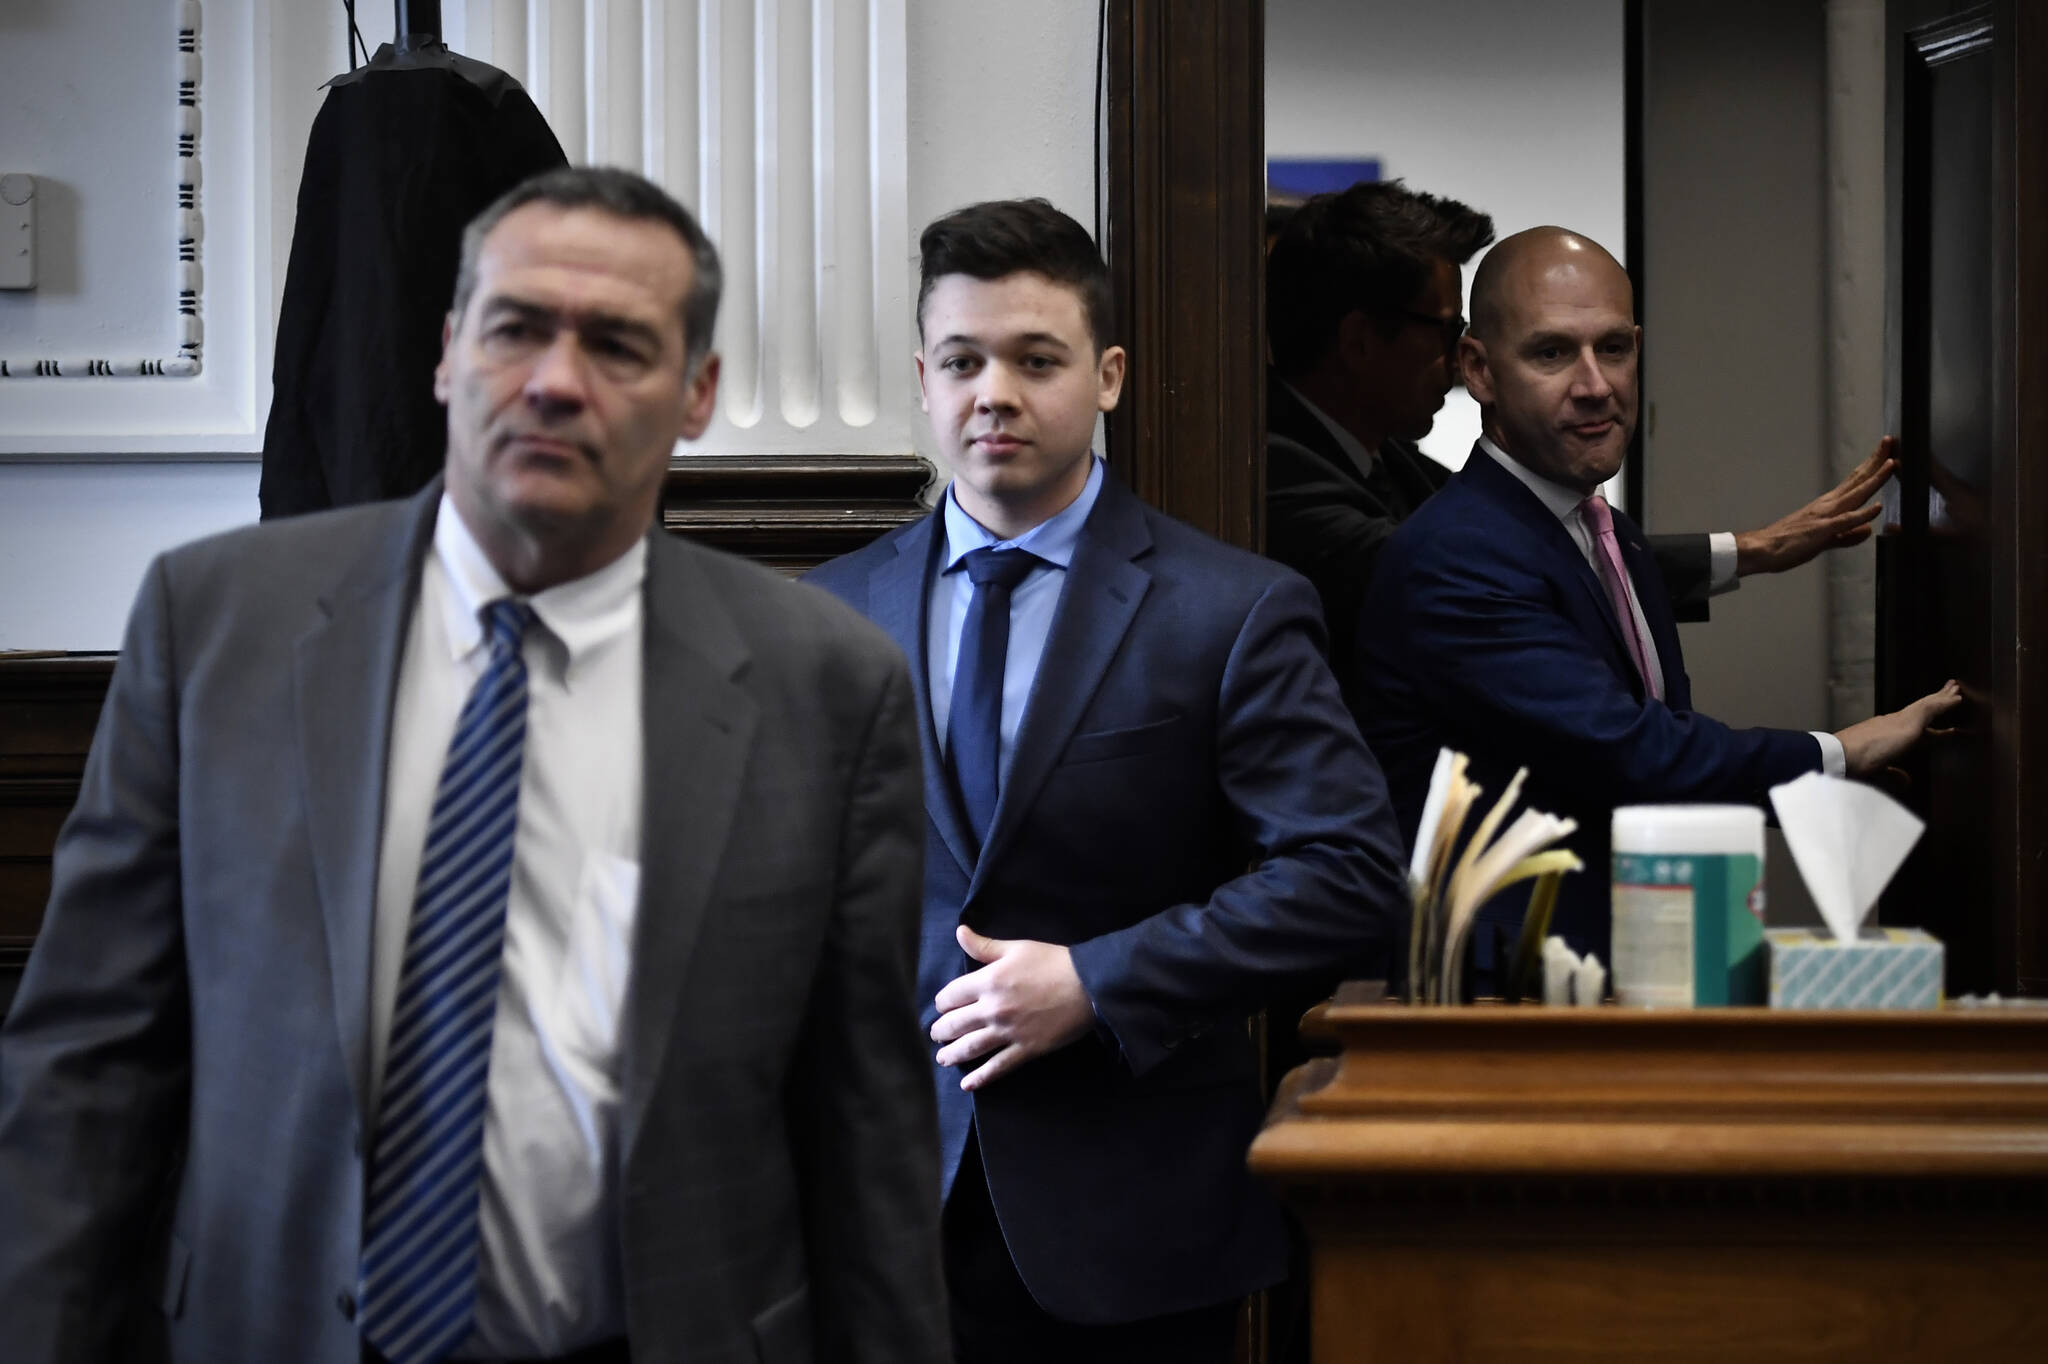 Kyle Rittenhouse, center, enters the courtroom with his attorneys Mark Richards, left, and Corey Chirafisi for a meeting called by Judge Bruce Schroeder at the Kenosha County Courthouse in Kenosha, Wis., on Thursday, Nov. 18, 2021. (Sean Krajacic / The Kenosha News)